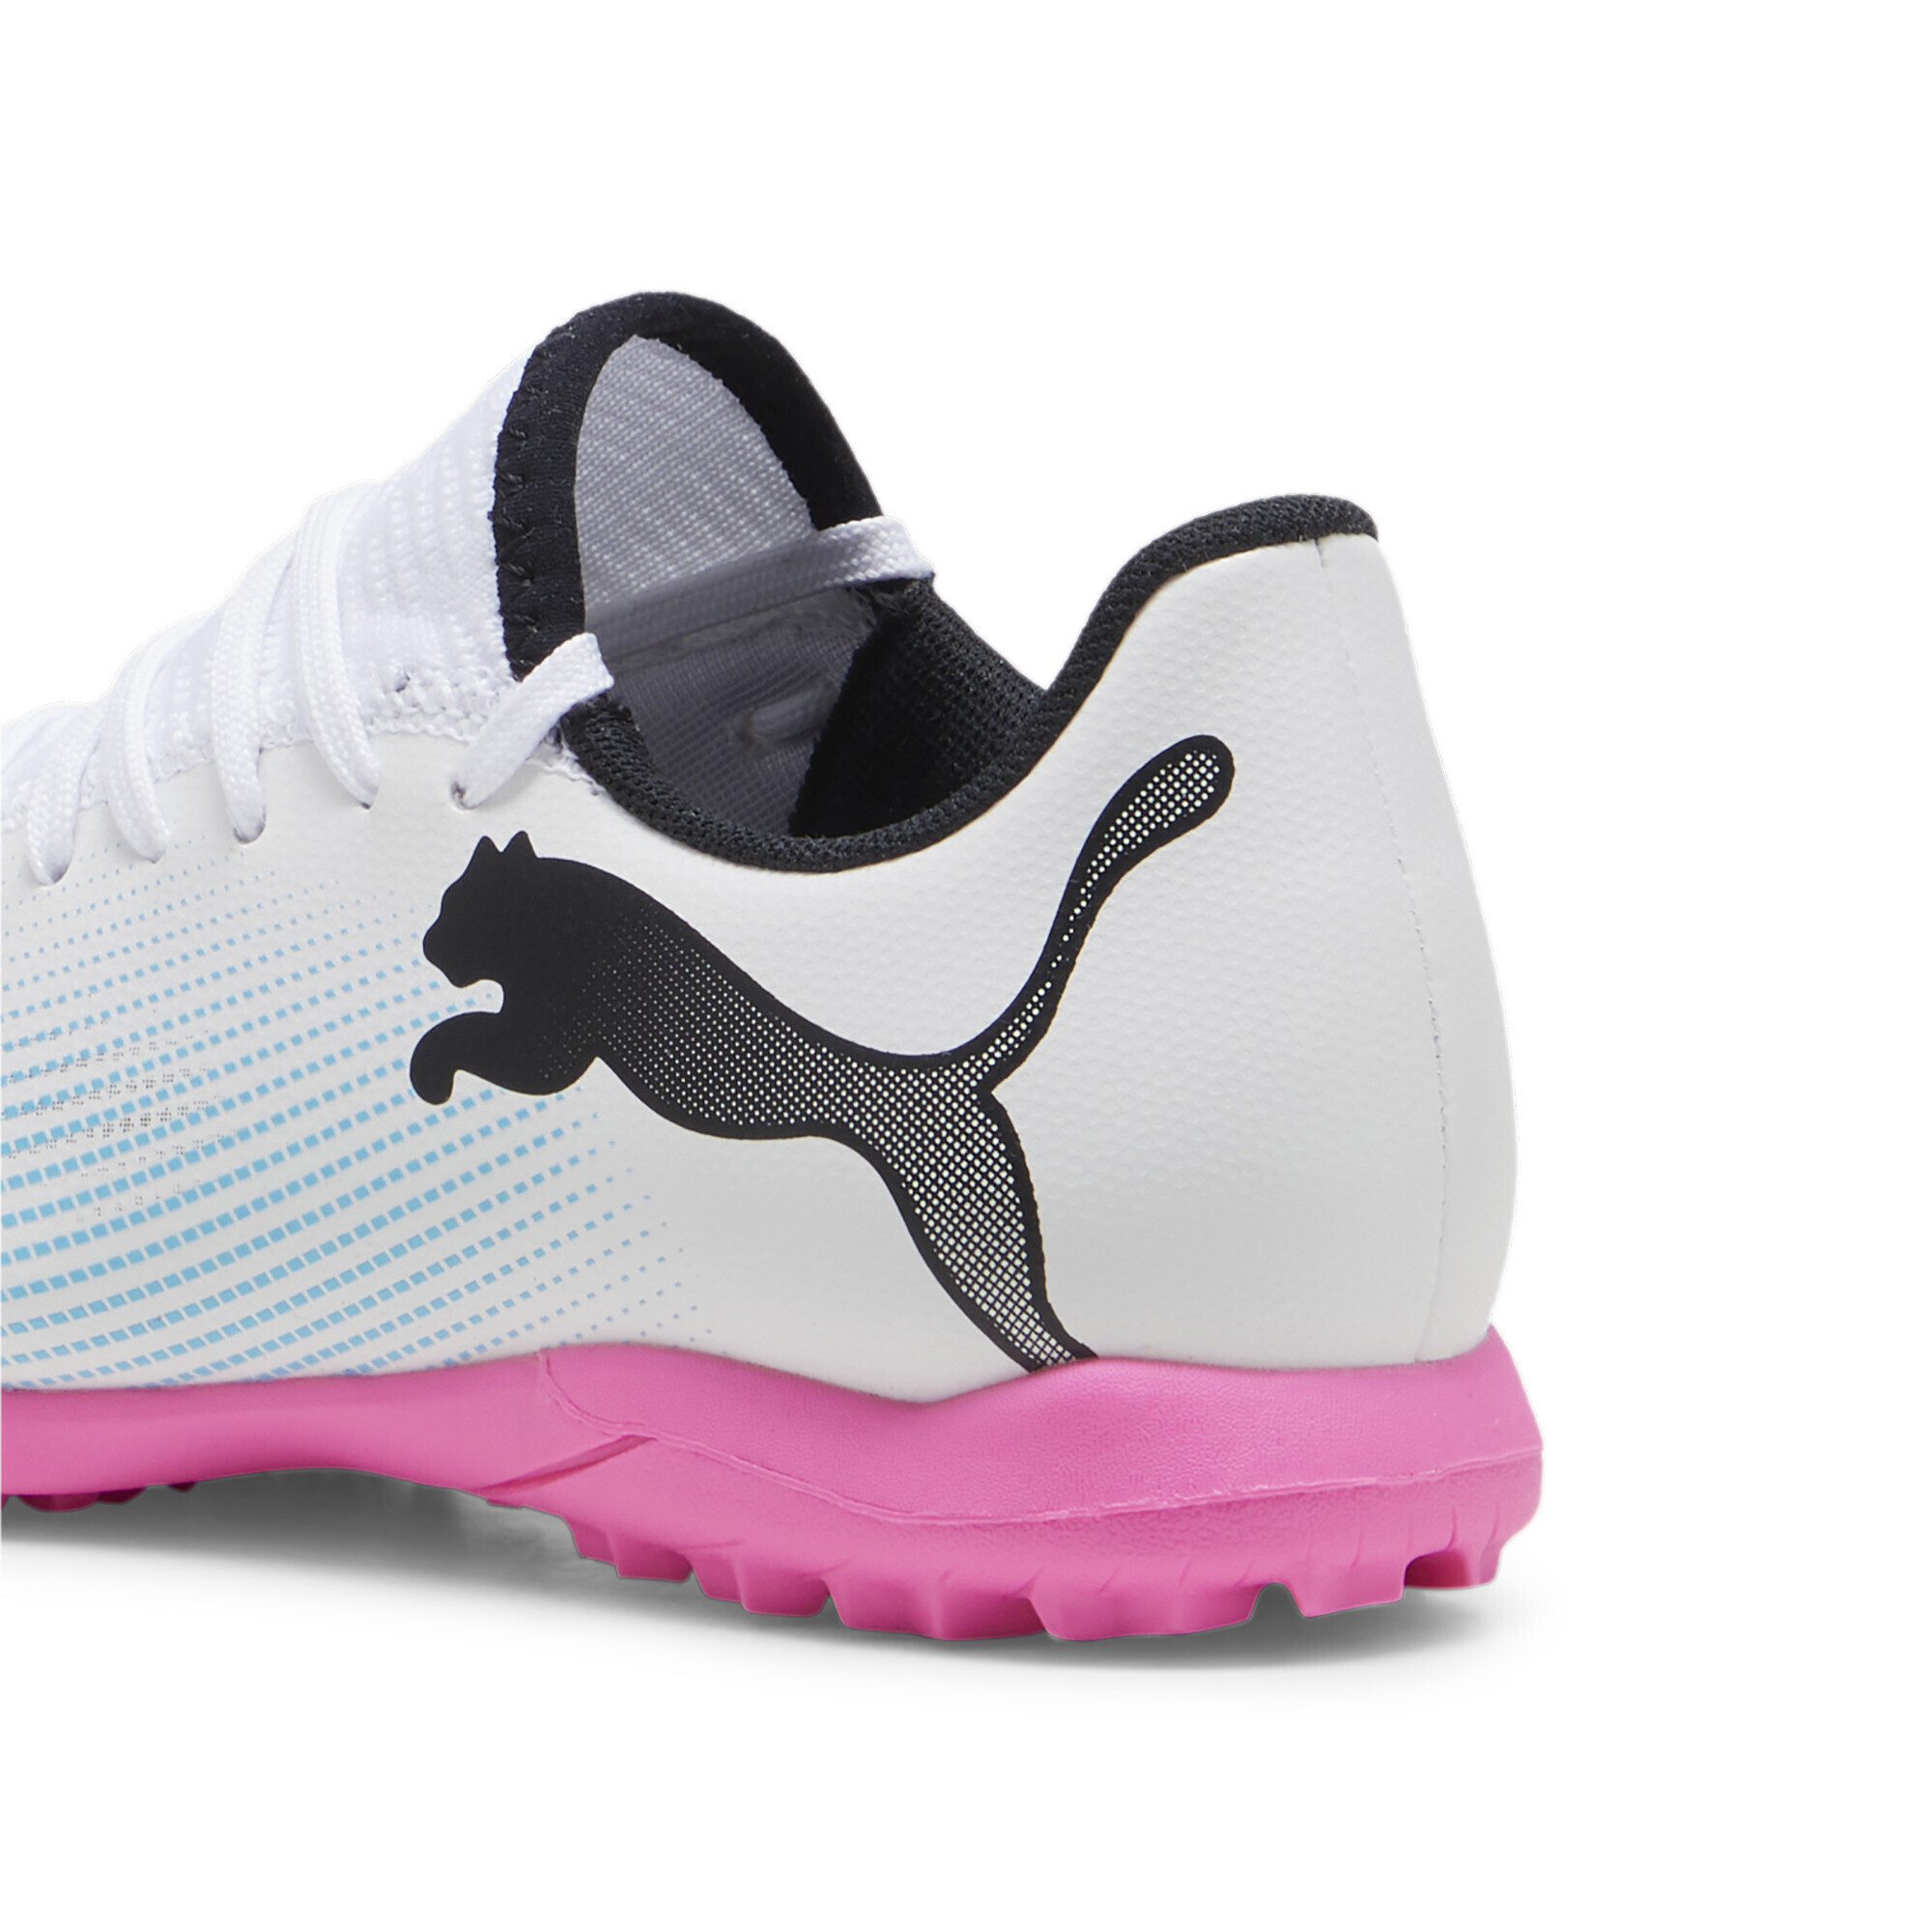 PUMA FUTURE 7 PLAY TT Youth Football Boots In White/Pink, Size EU 34